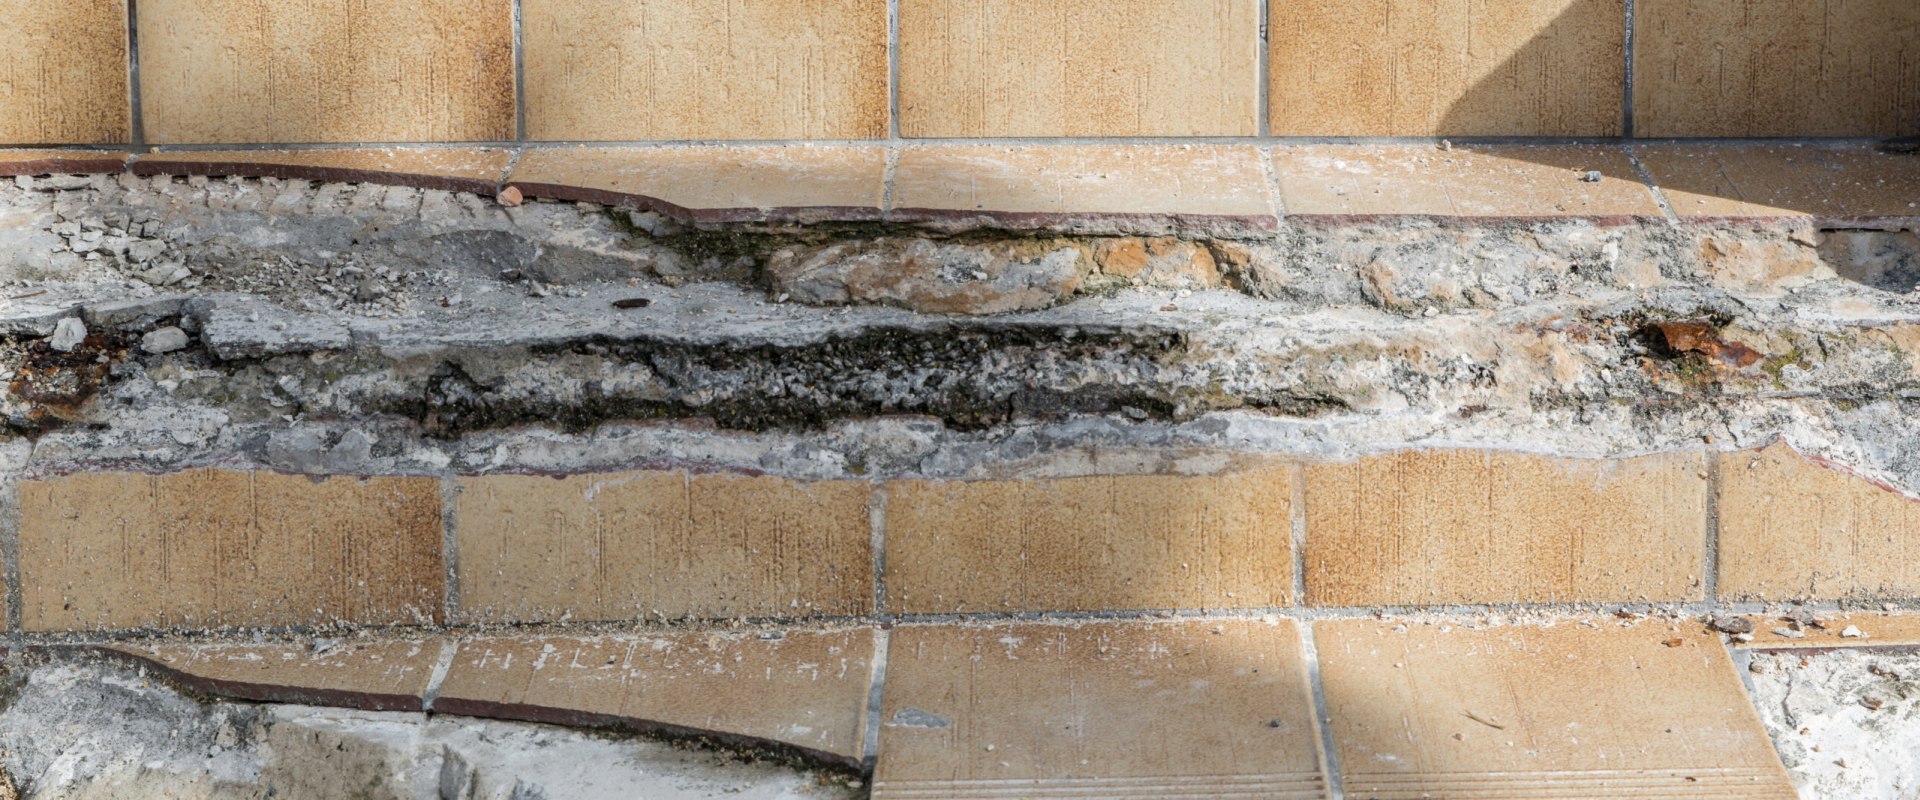 How long does water damage take to dry out?